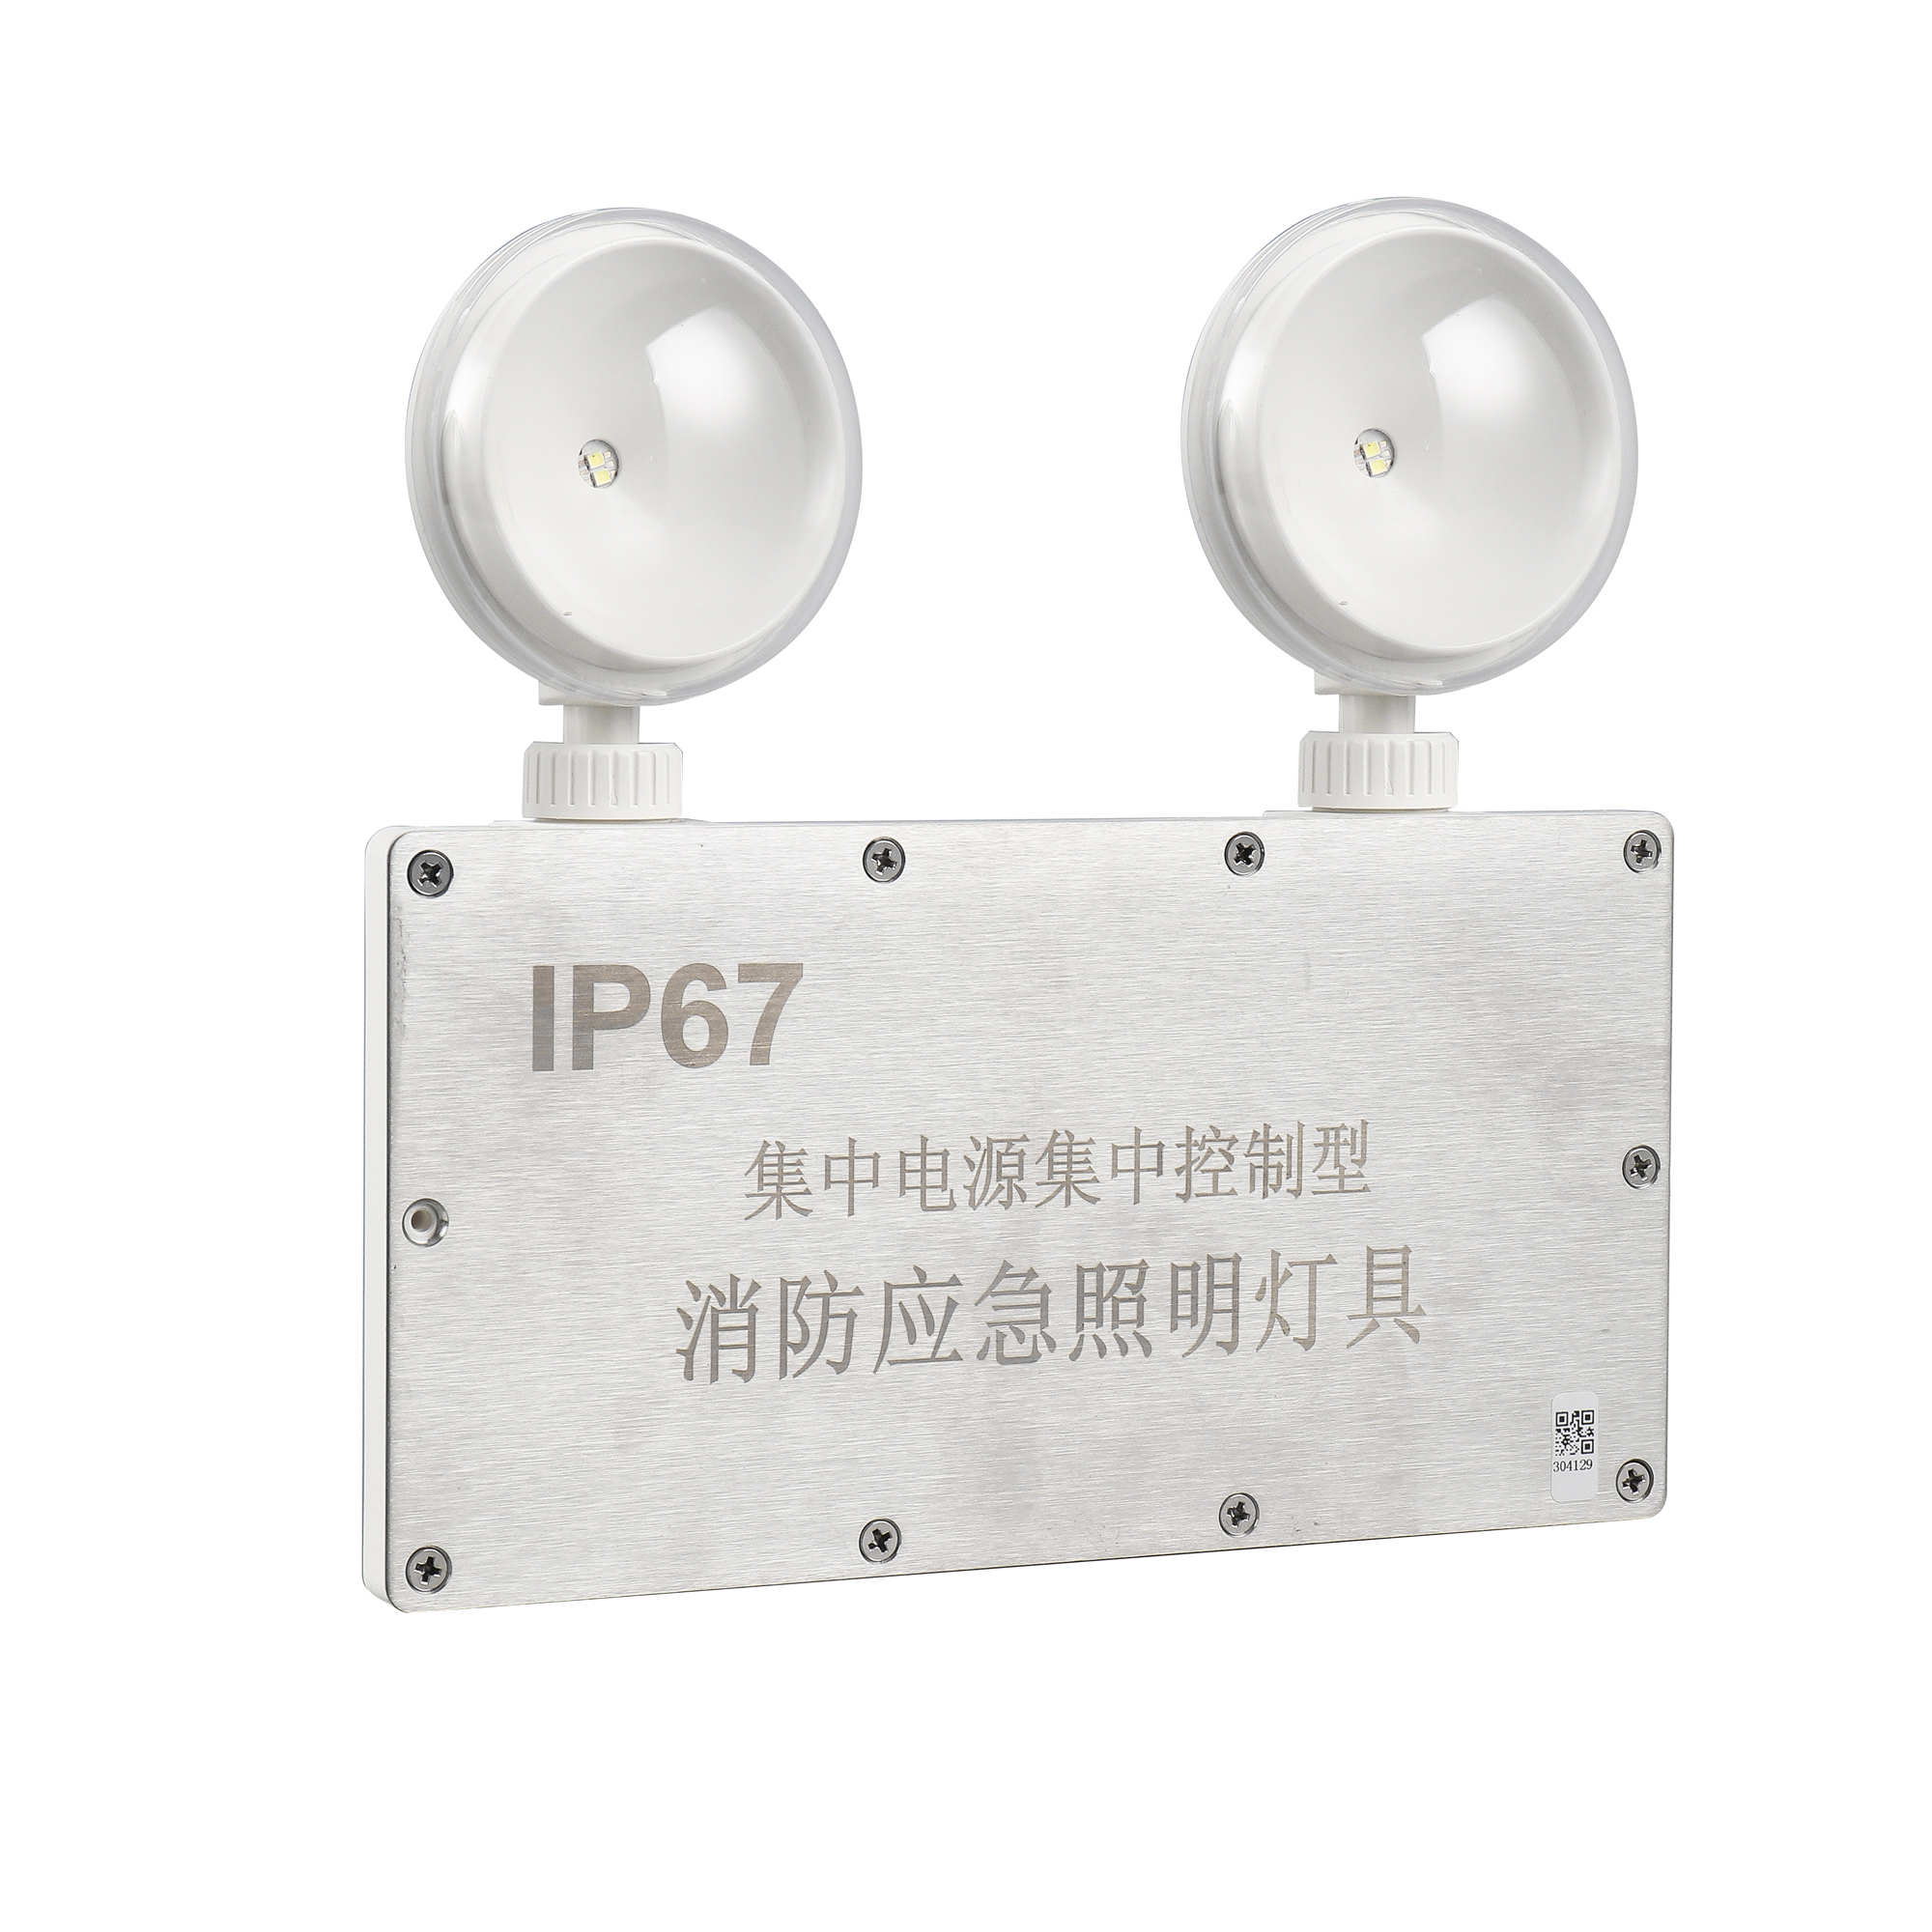 Centralized power supply and centralized control waterproof dual head emergency light